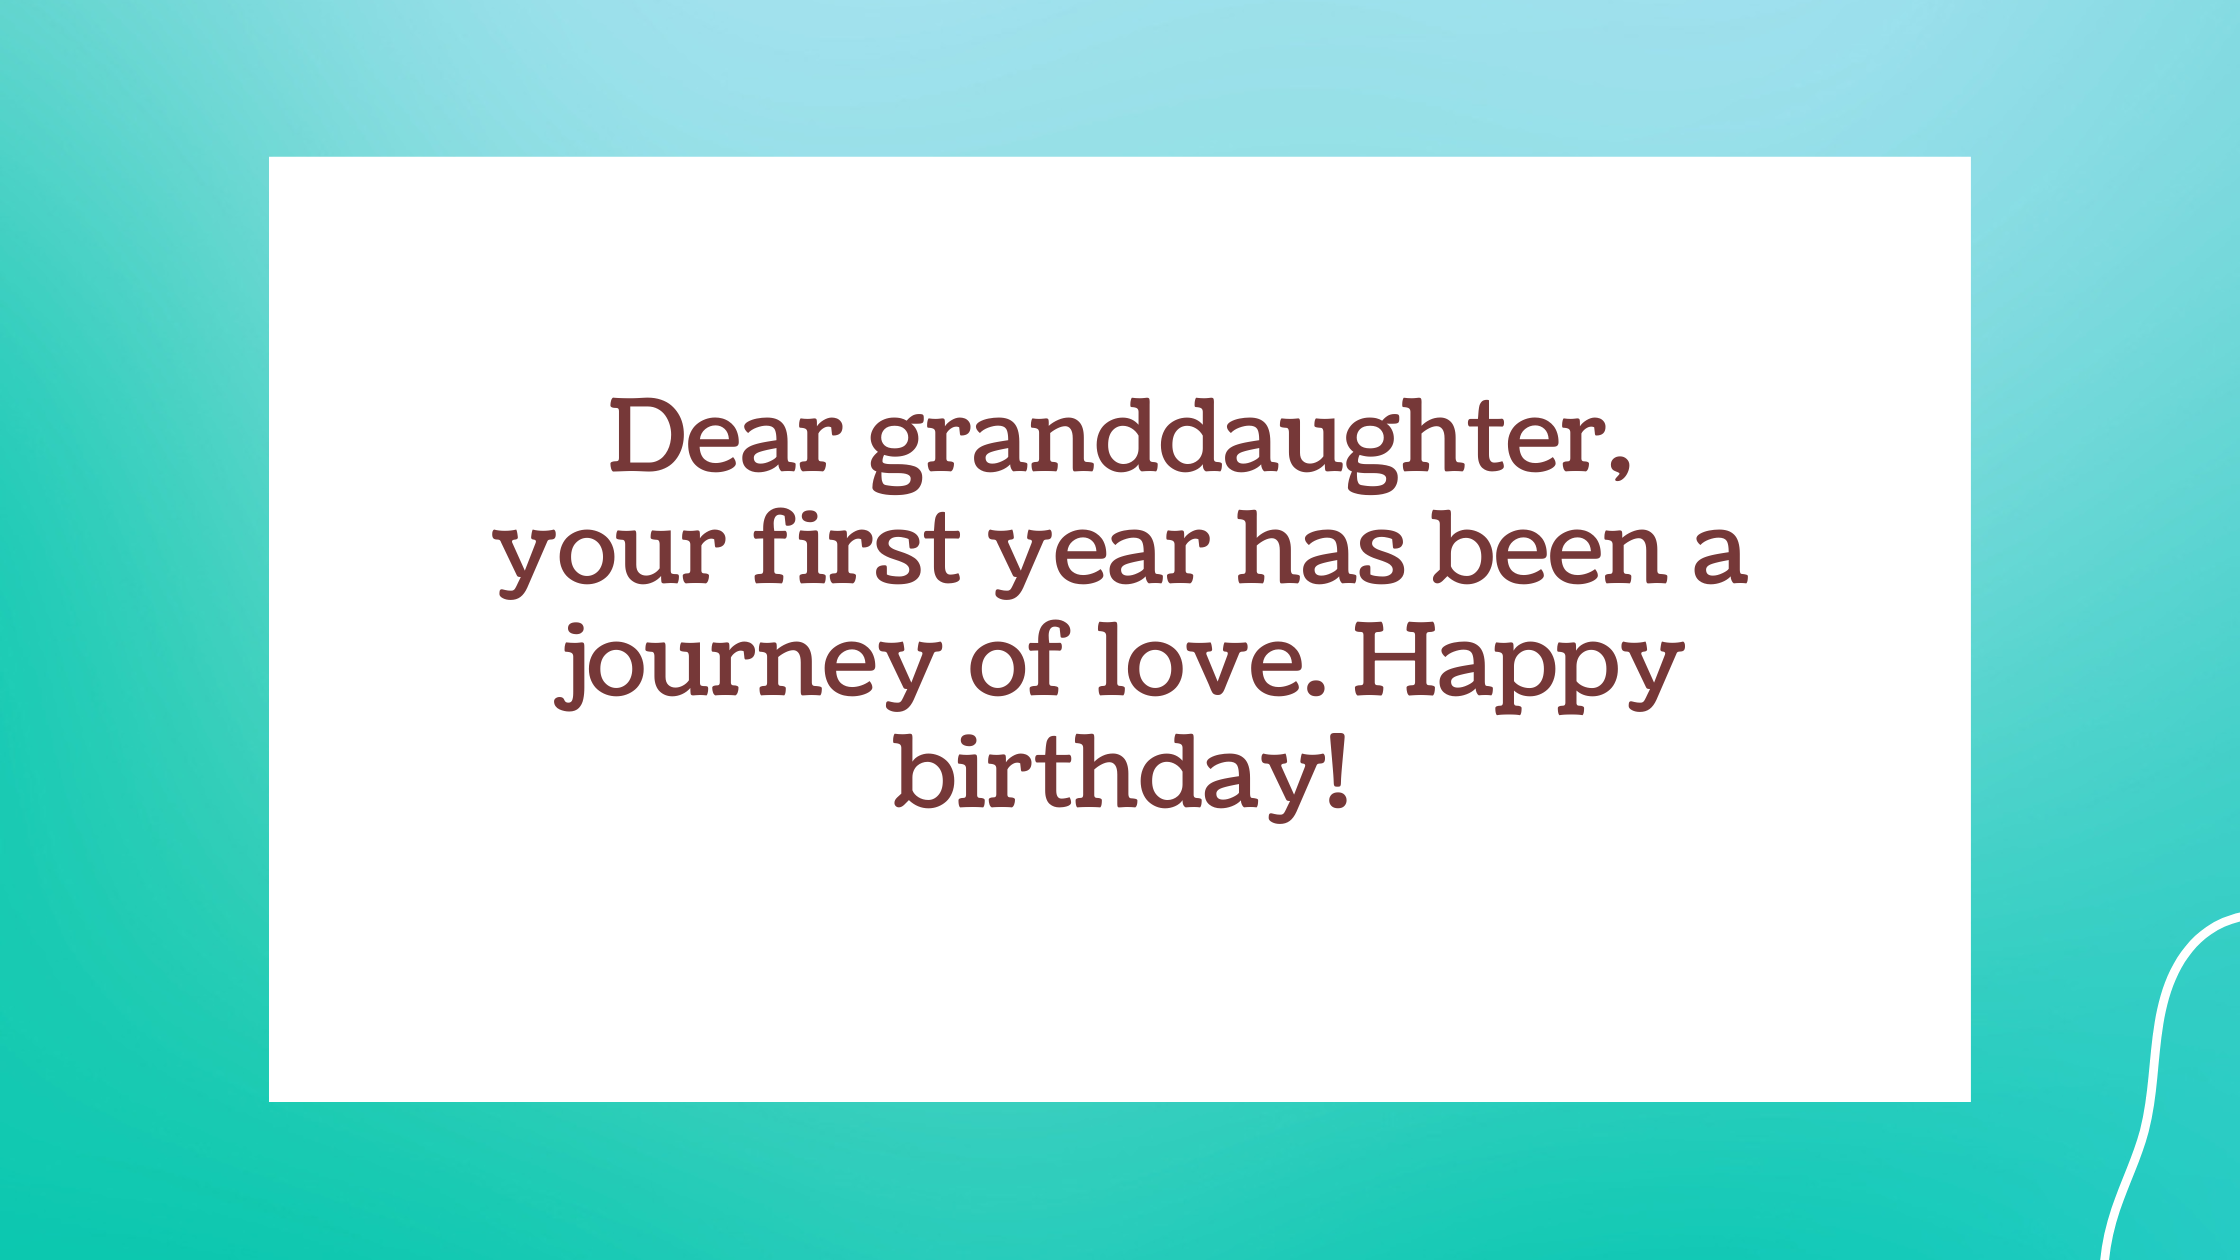 50 Adorable First Birthday Wishes for Granddaughter from Grandma: Celebrating a Year of Joy and Love